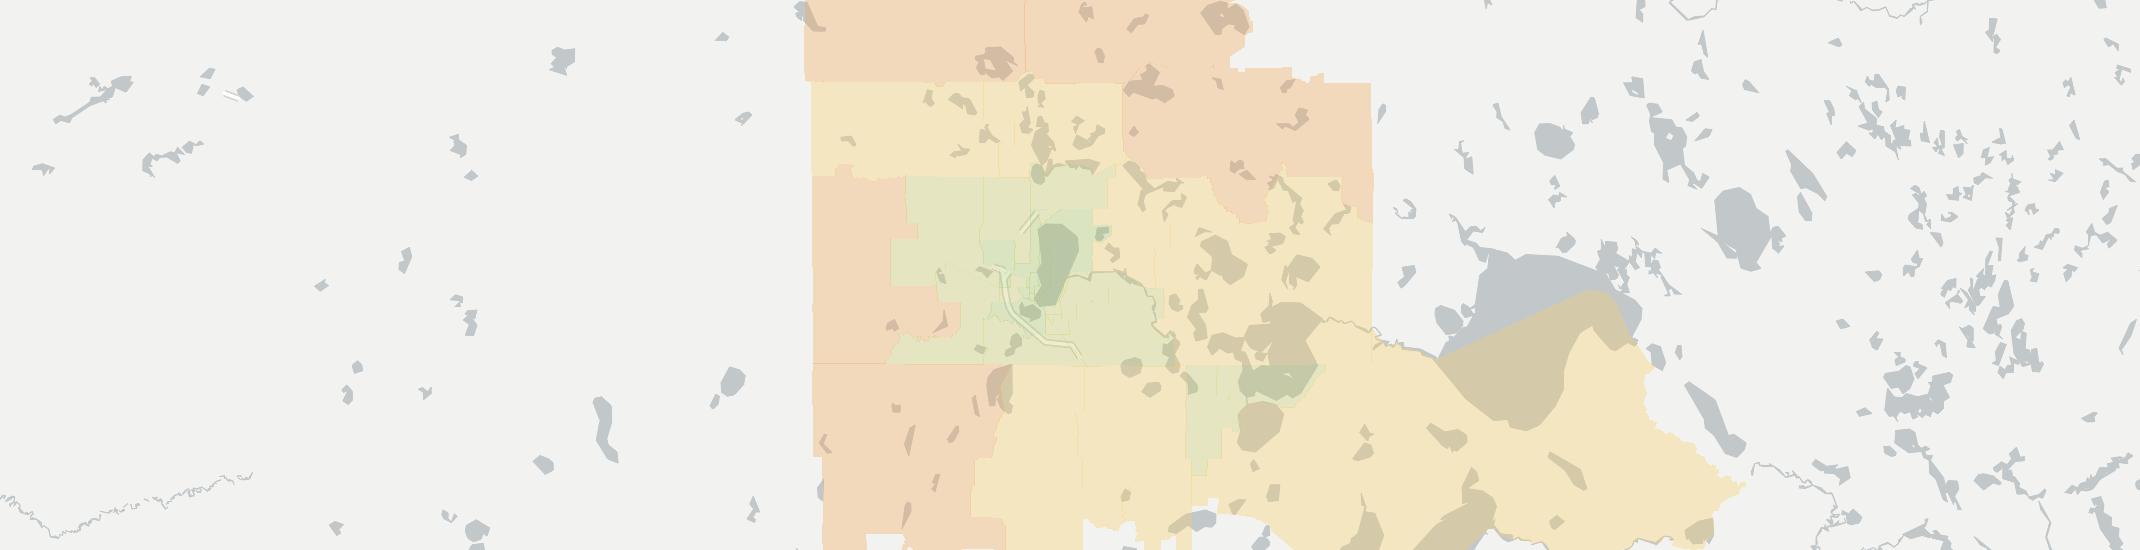 Bemidji Internet Competition Map. Click for interactive map